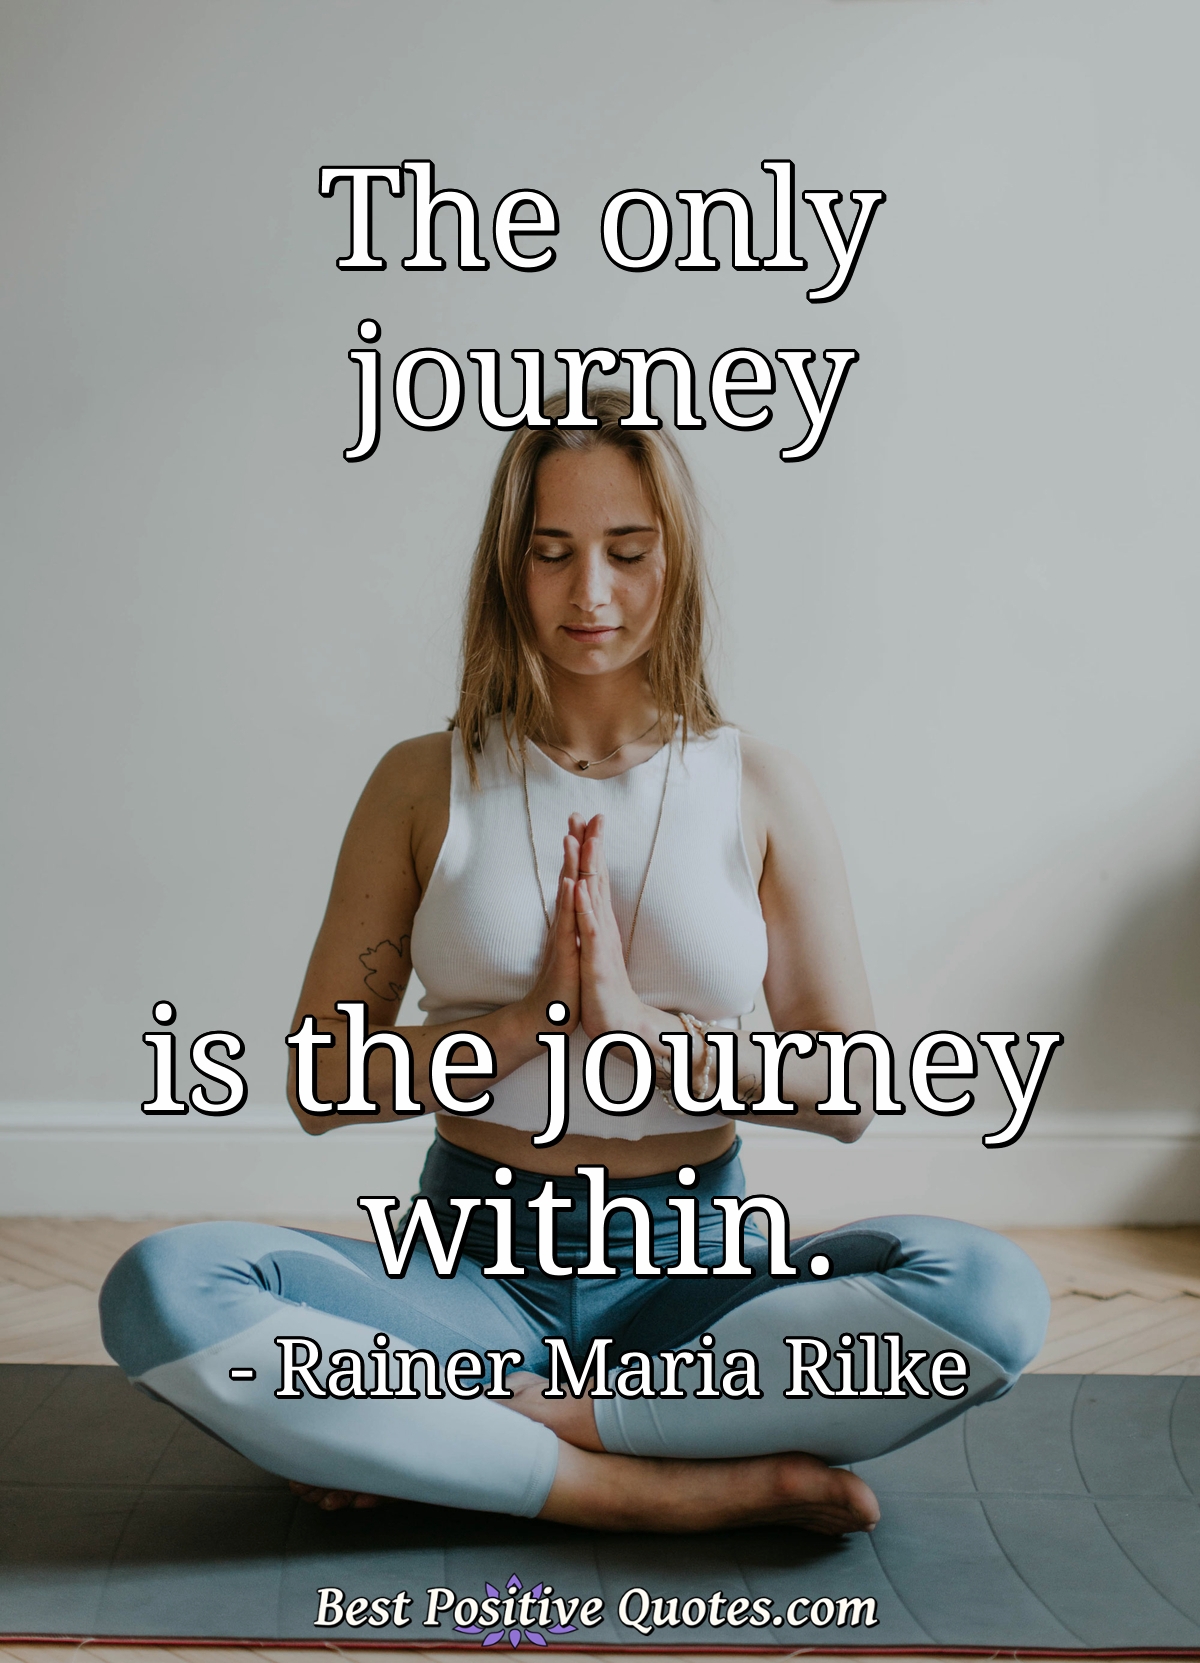 The only journey is the journey within. - Rainer Maria Rilke